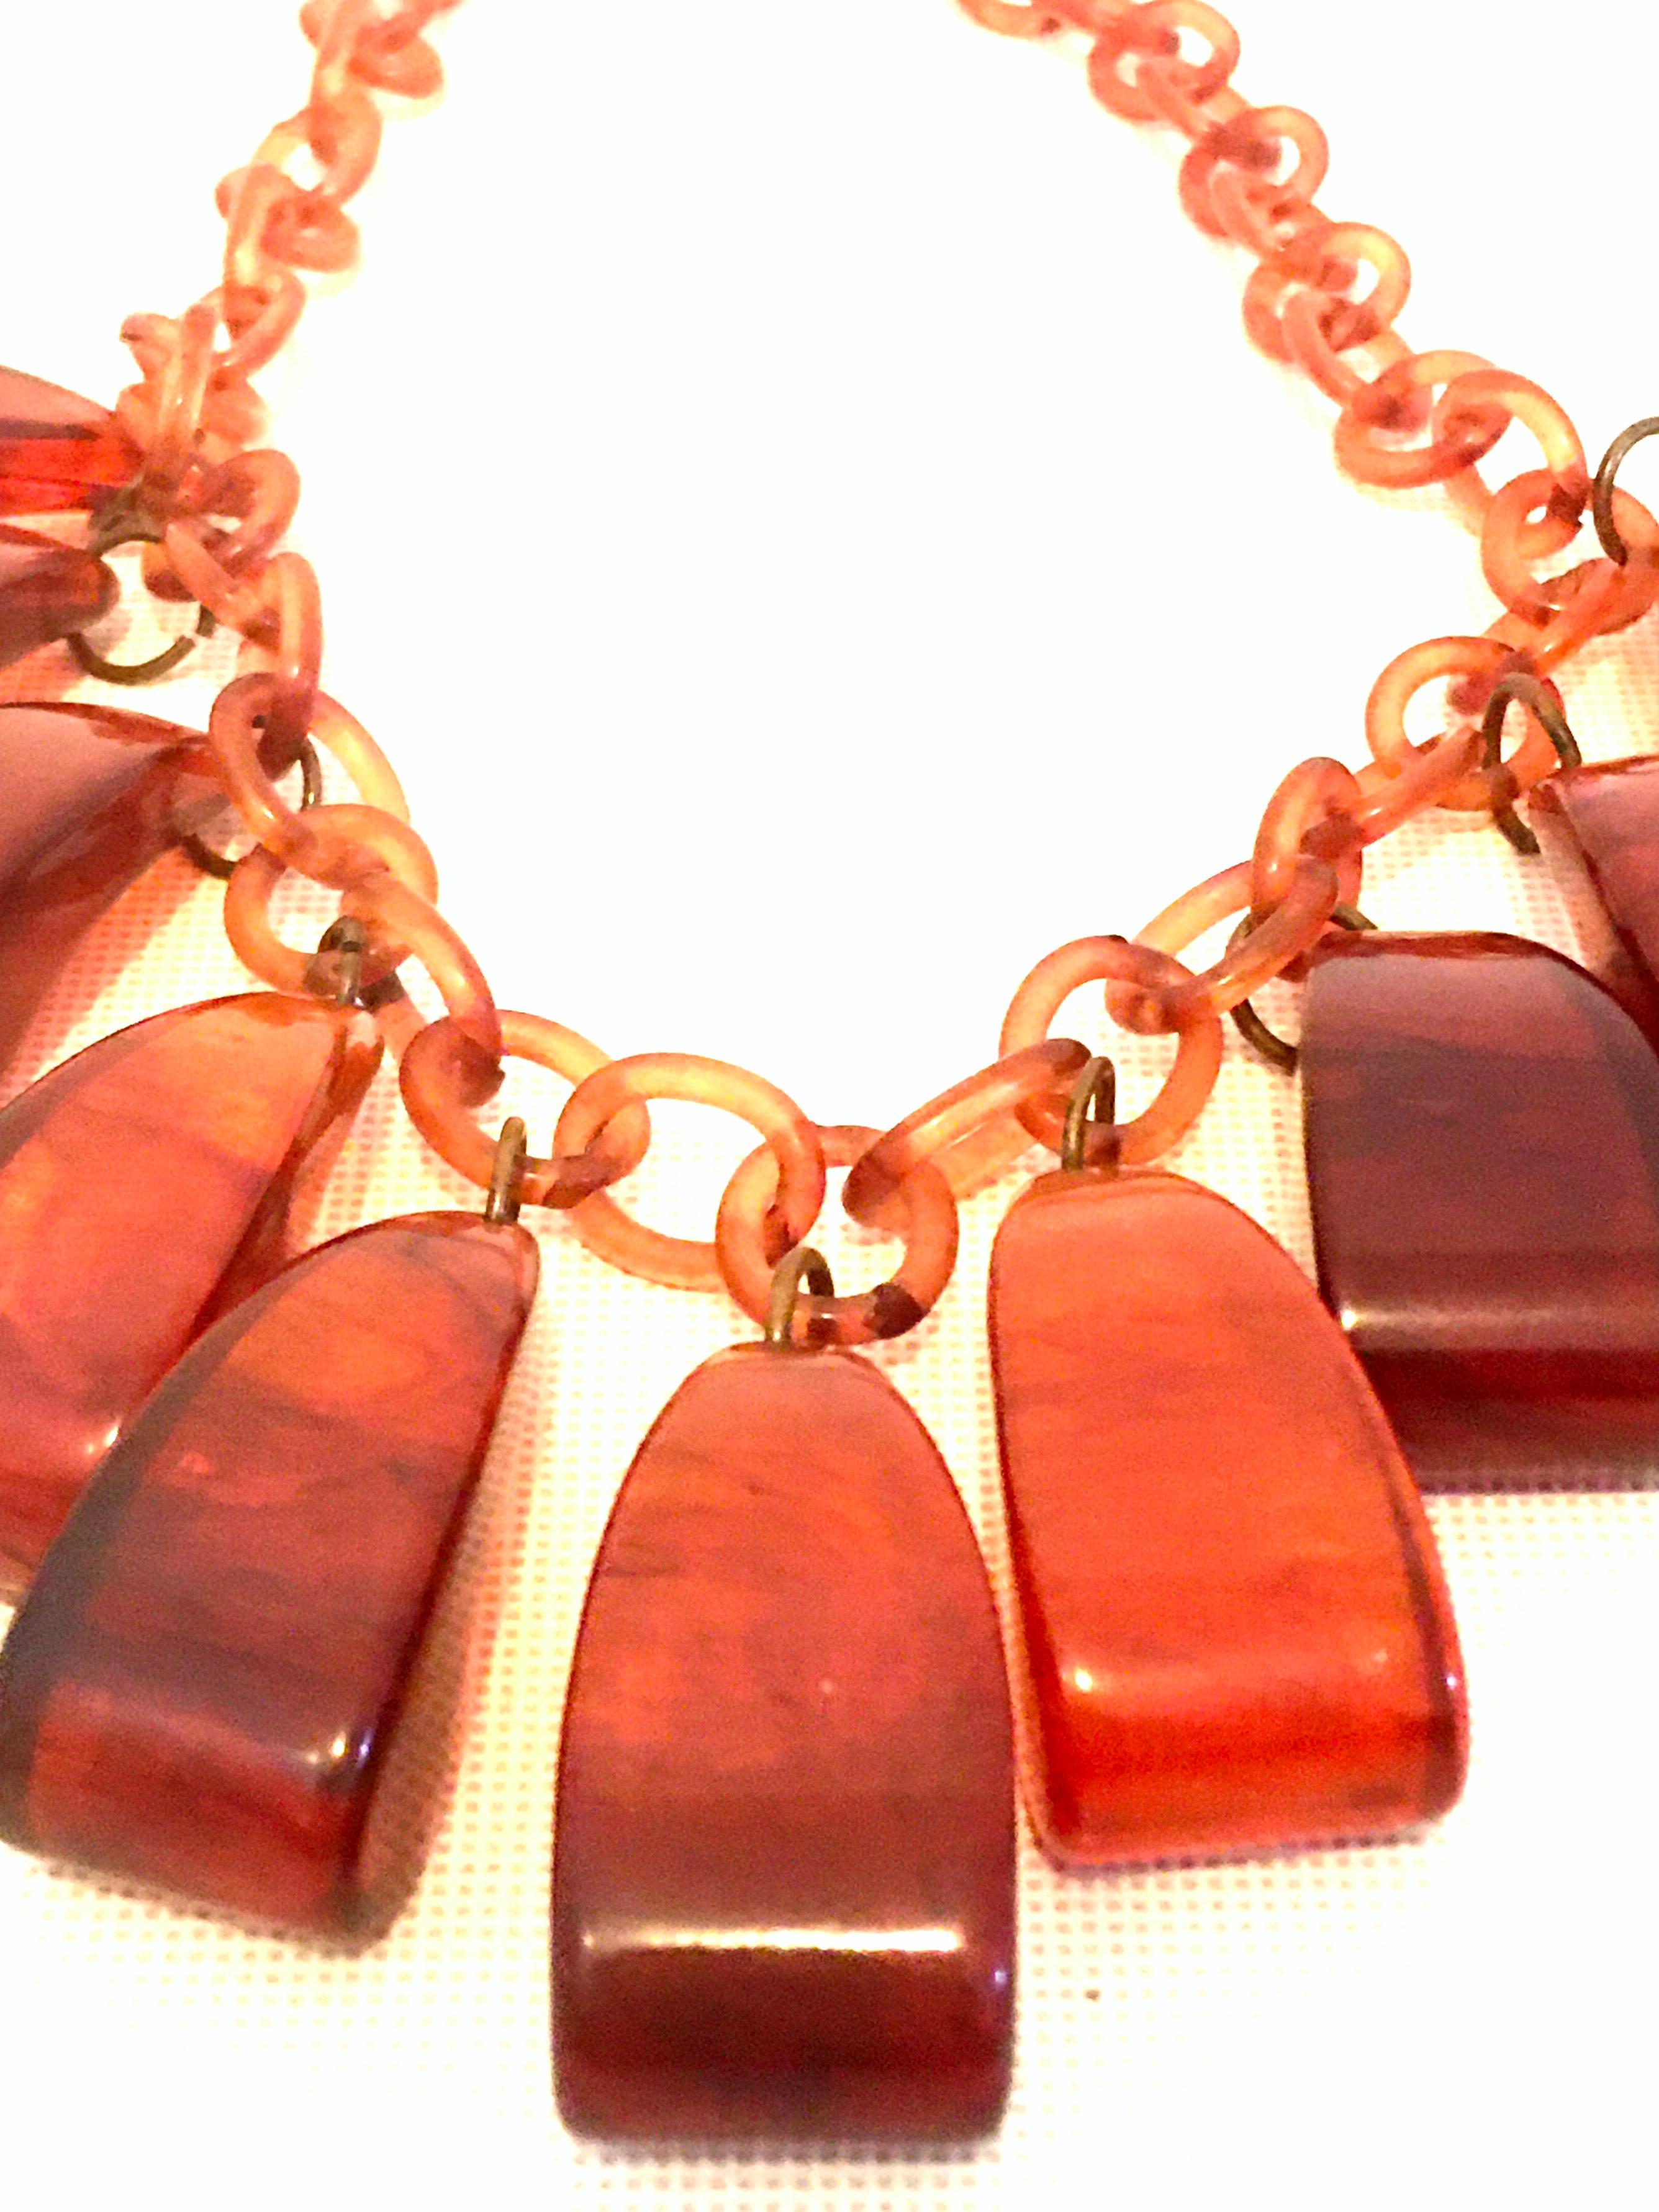 Women's or Men's Mid-20th Century Art Deco Root Beer Bakelite & Celluloid Chain Link Necklace For Sale